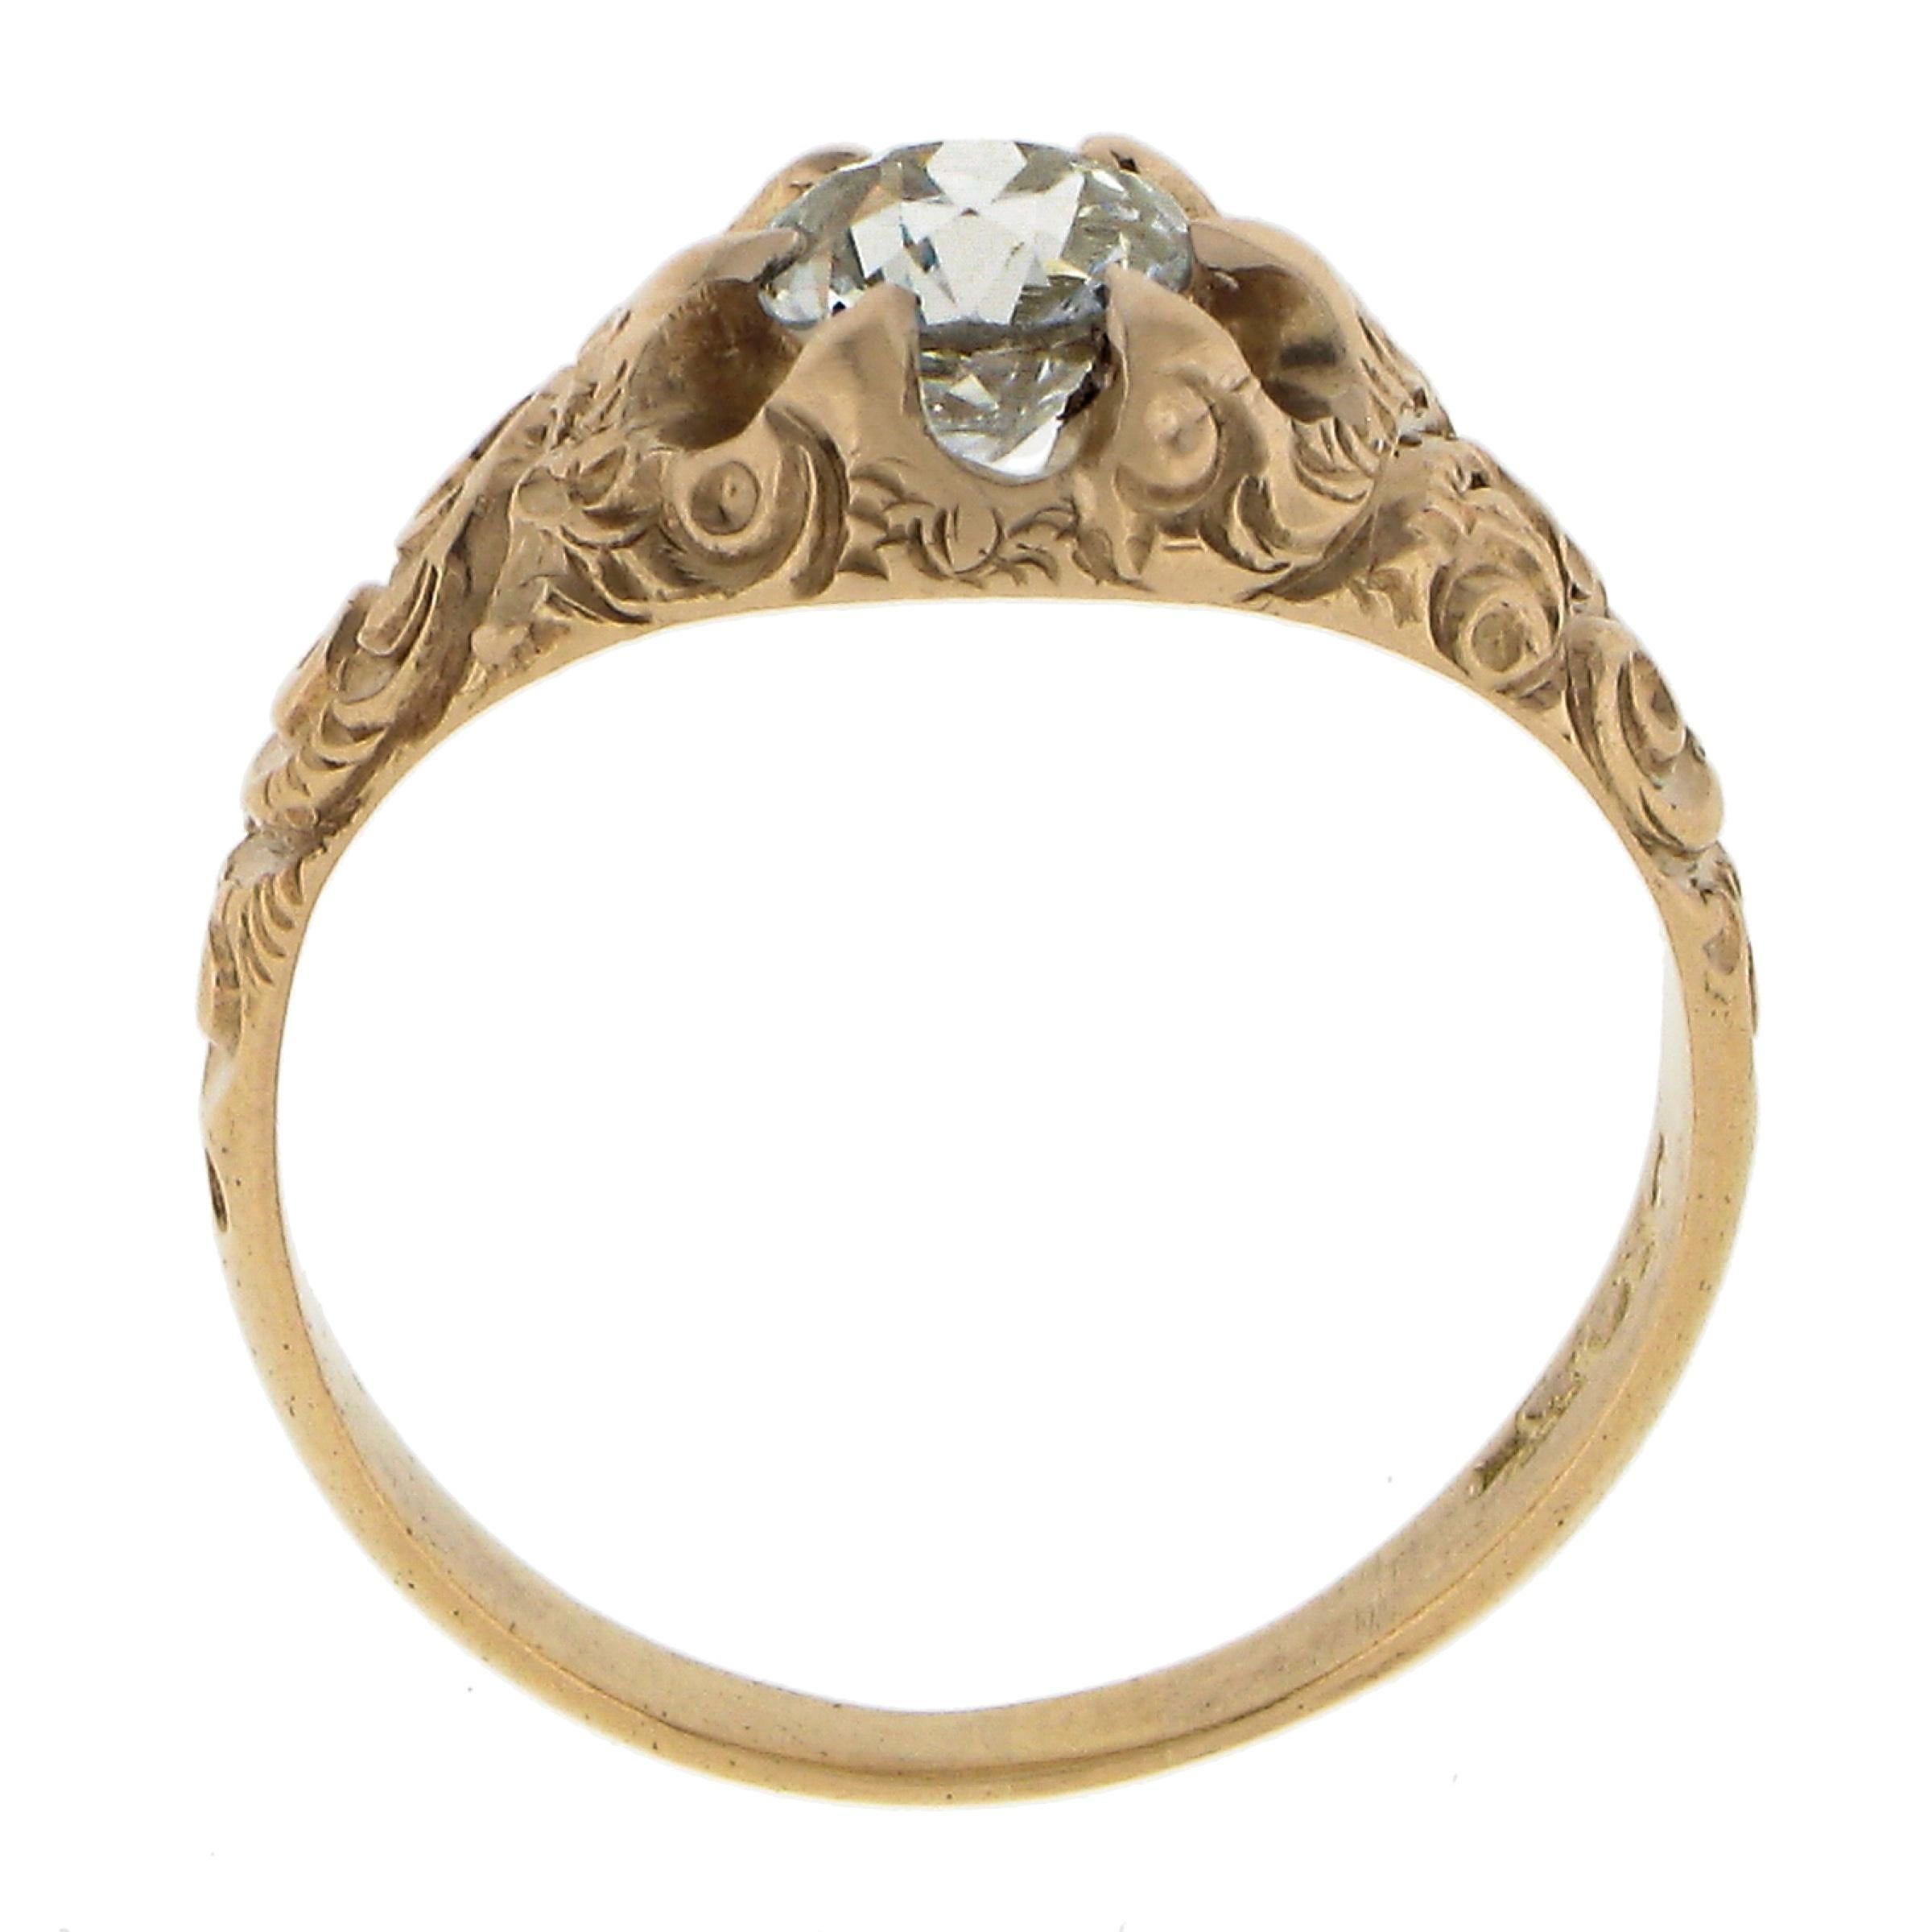 Antique 14k Gold 0.68ct Old Cushion Diamond Engagement Ring w/ Repousse Sides For Sale 2